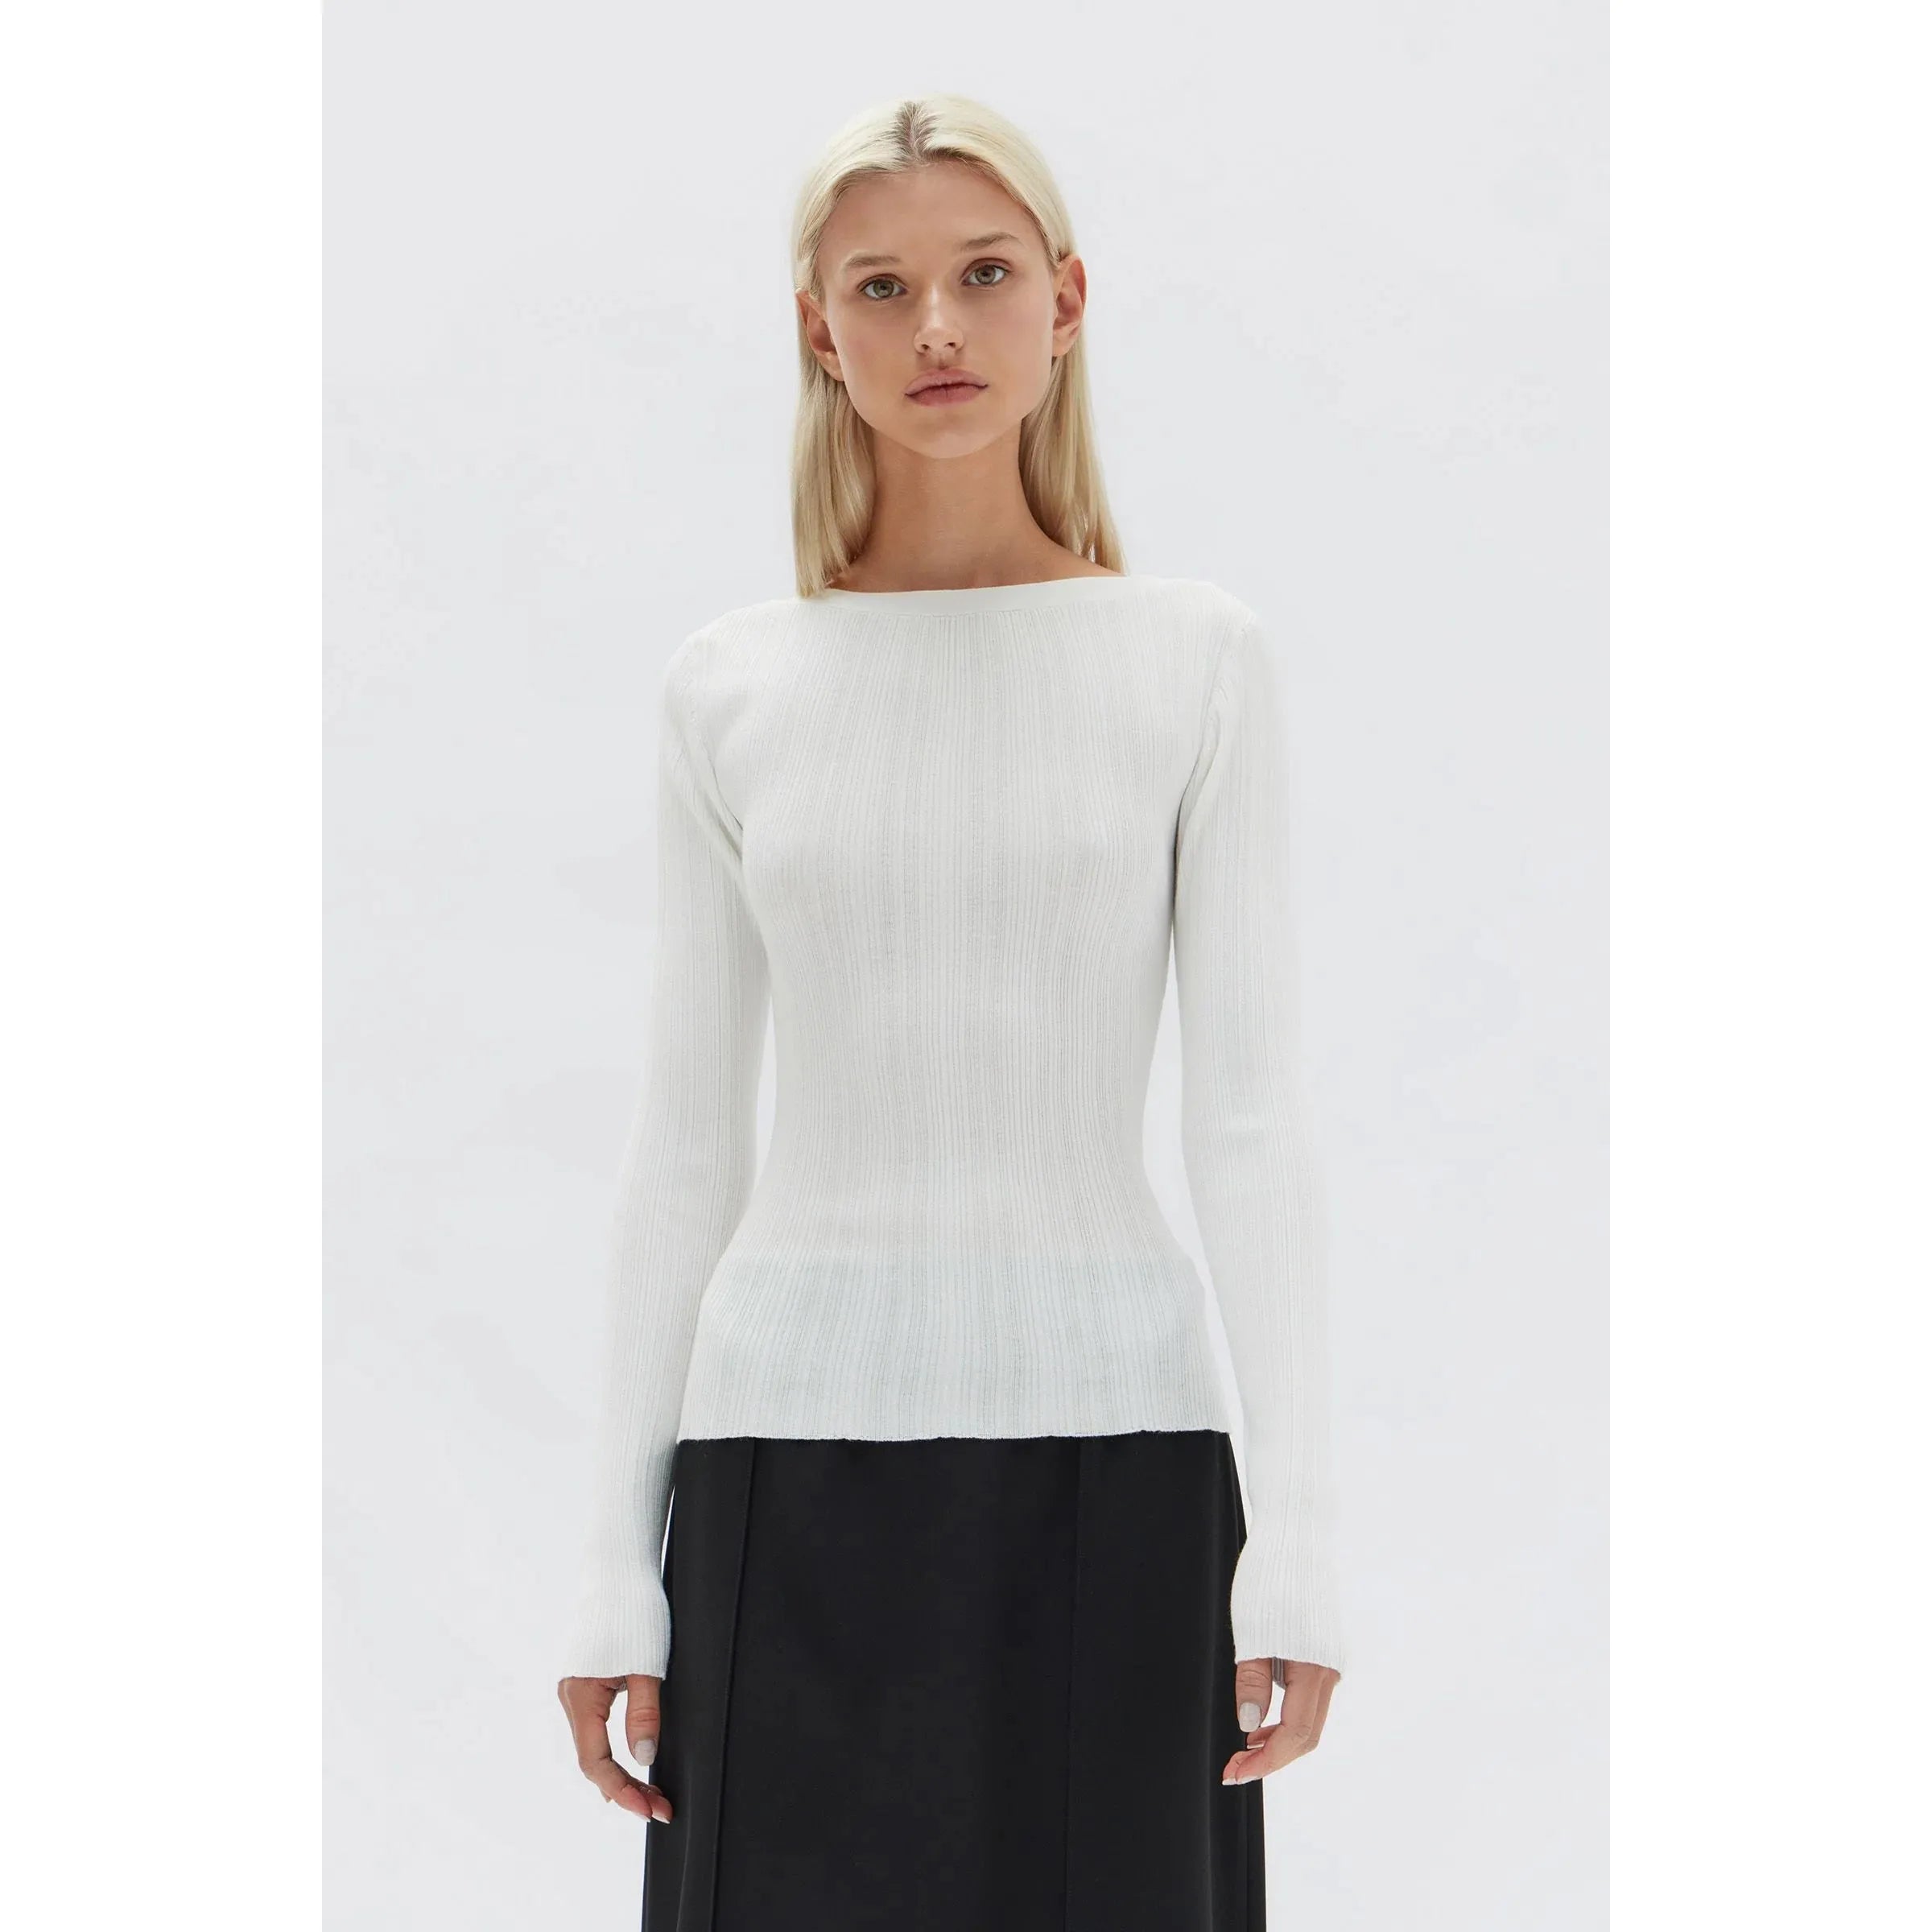 Assembly Label Vienna Knit Long Sleeve Top - Antique White